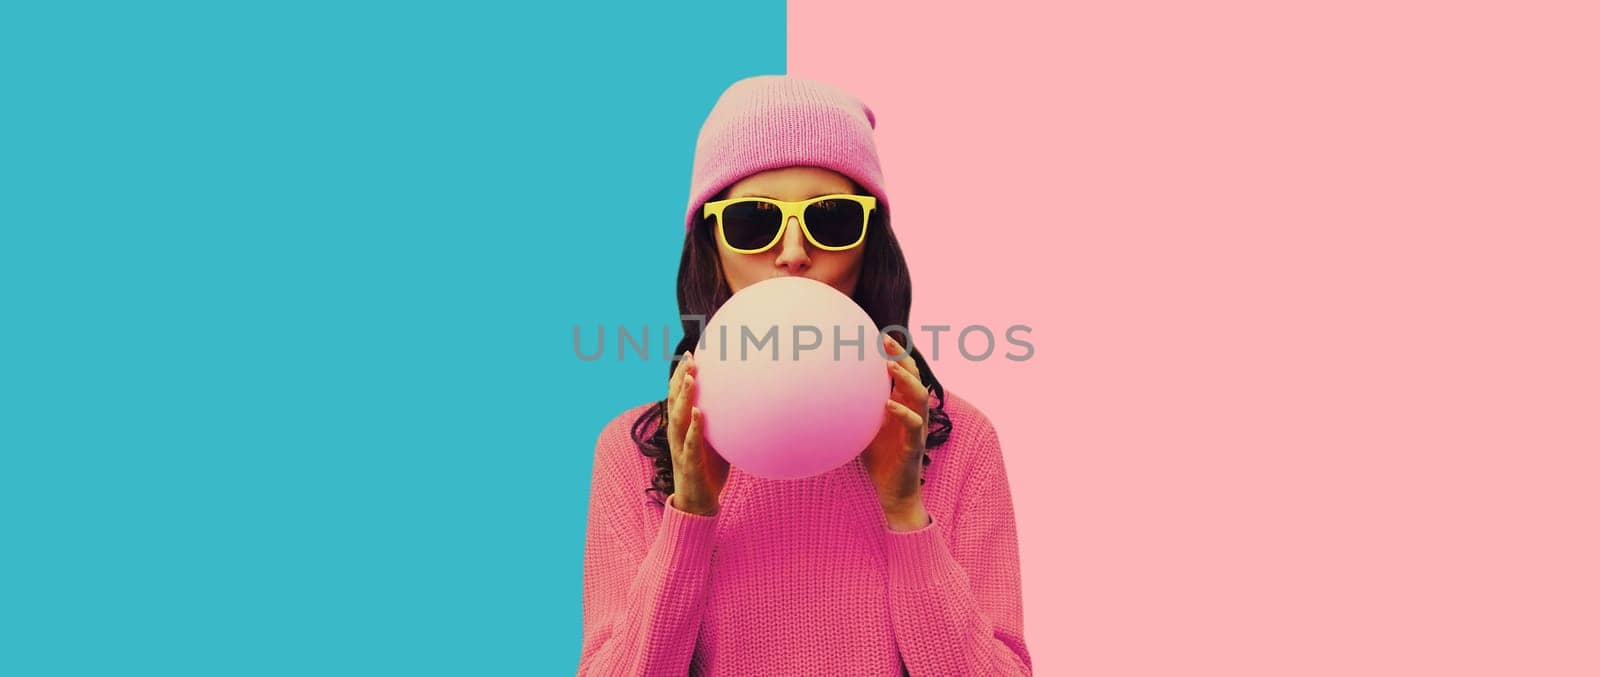 Fashion portrait stylish cool young woman inflating chewing gum or balloon on colorful background by Rohappy